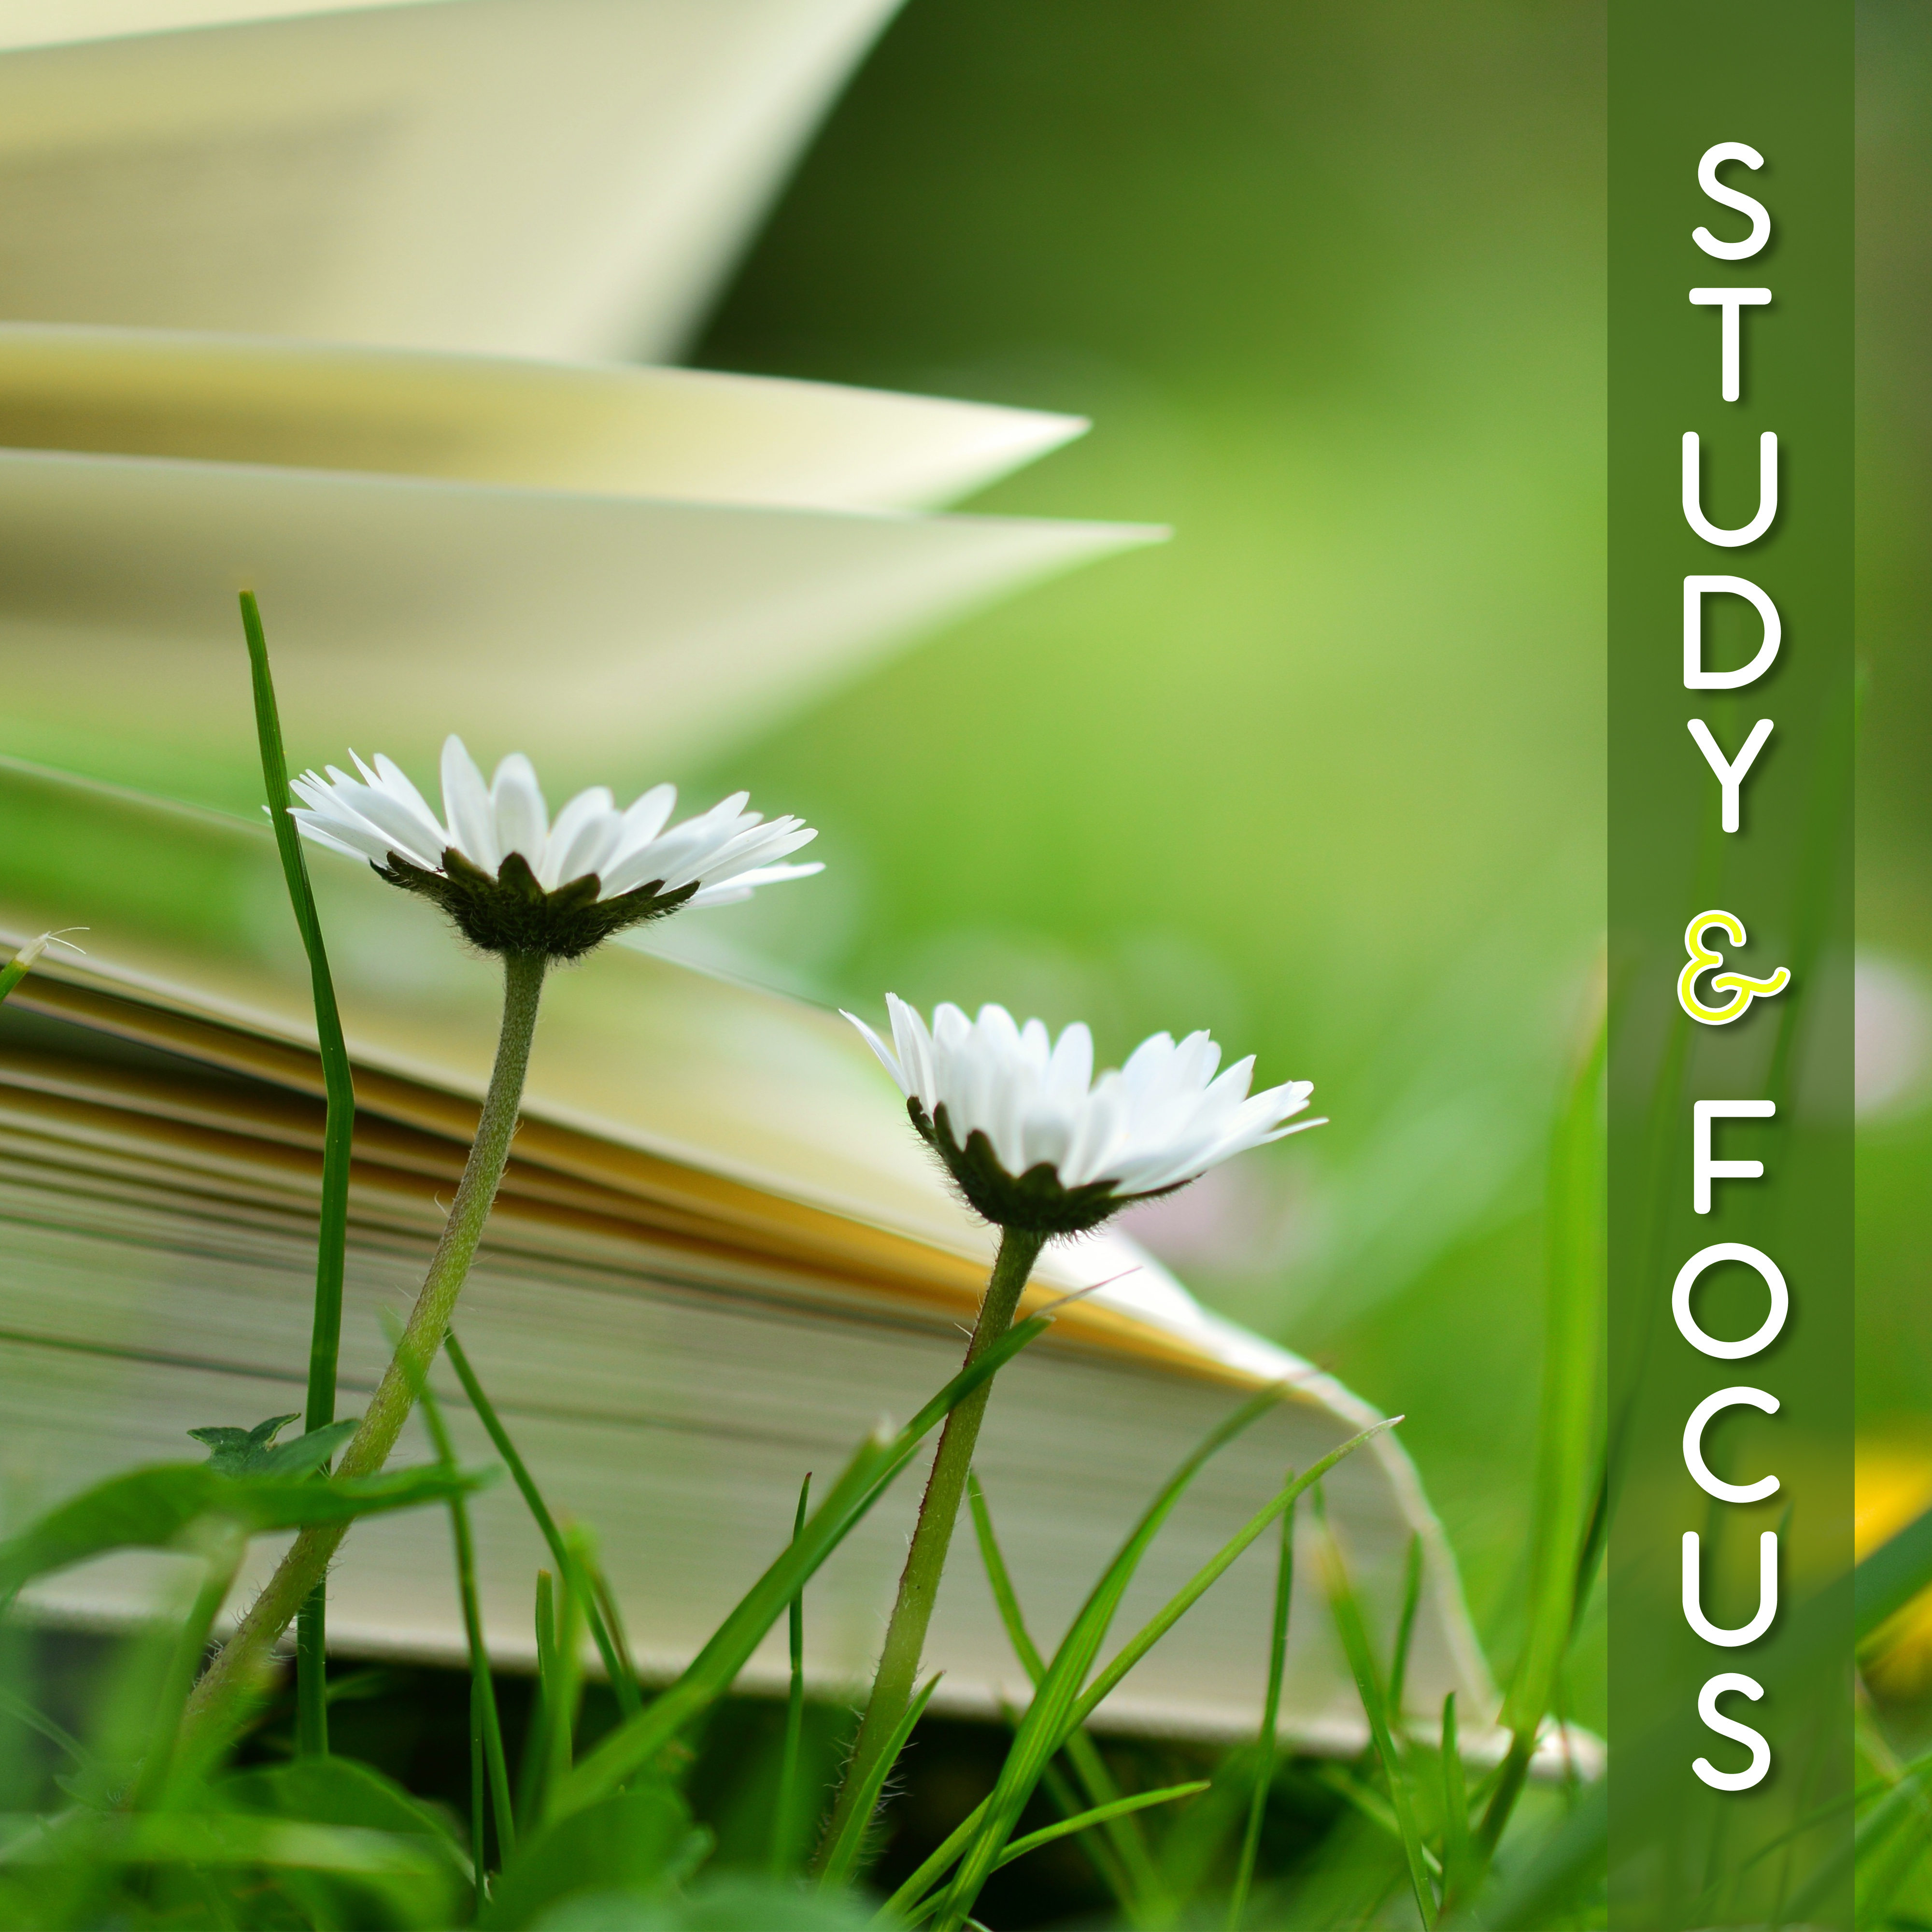 Study  Focus  Music for Learning, Keep Focus  Improve Memory, Relaxing Music for Study